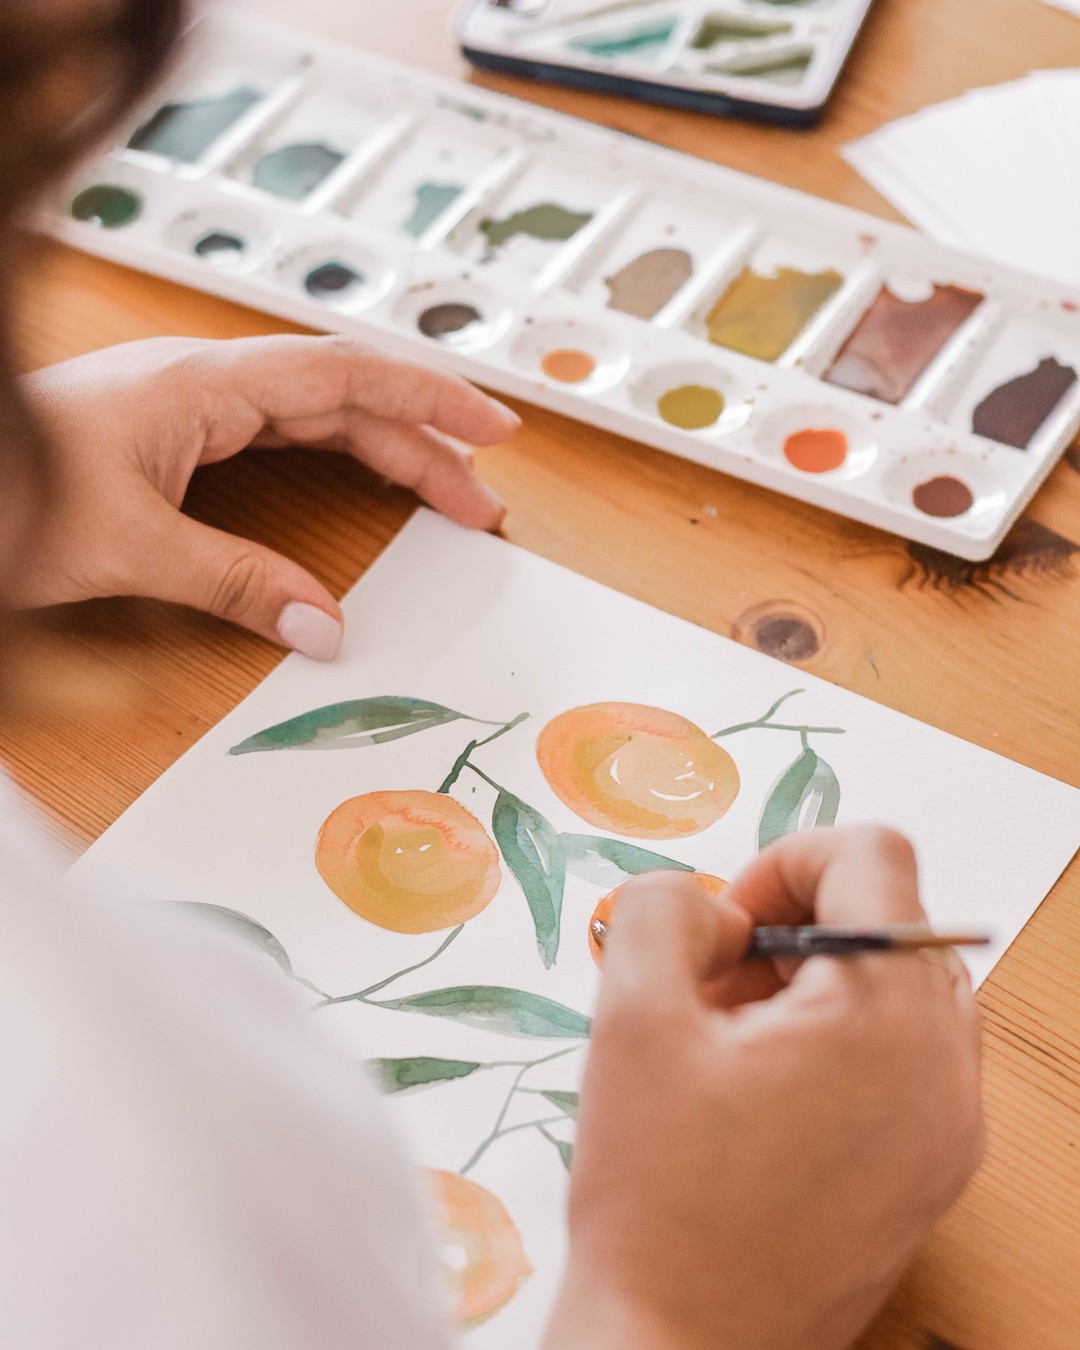 Ignite your creativity and your inner artist at this week’s Ward Workshop: Watercolor techniques by Binnie Keum presented by MORI by Art+Flea.  #WeAreWard Where: South Shore Market When: Saturday, February, 8 from 11am-2pm